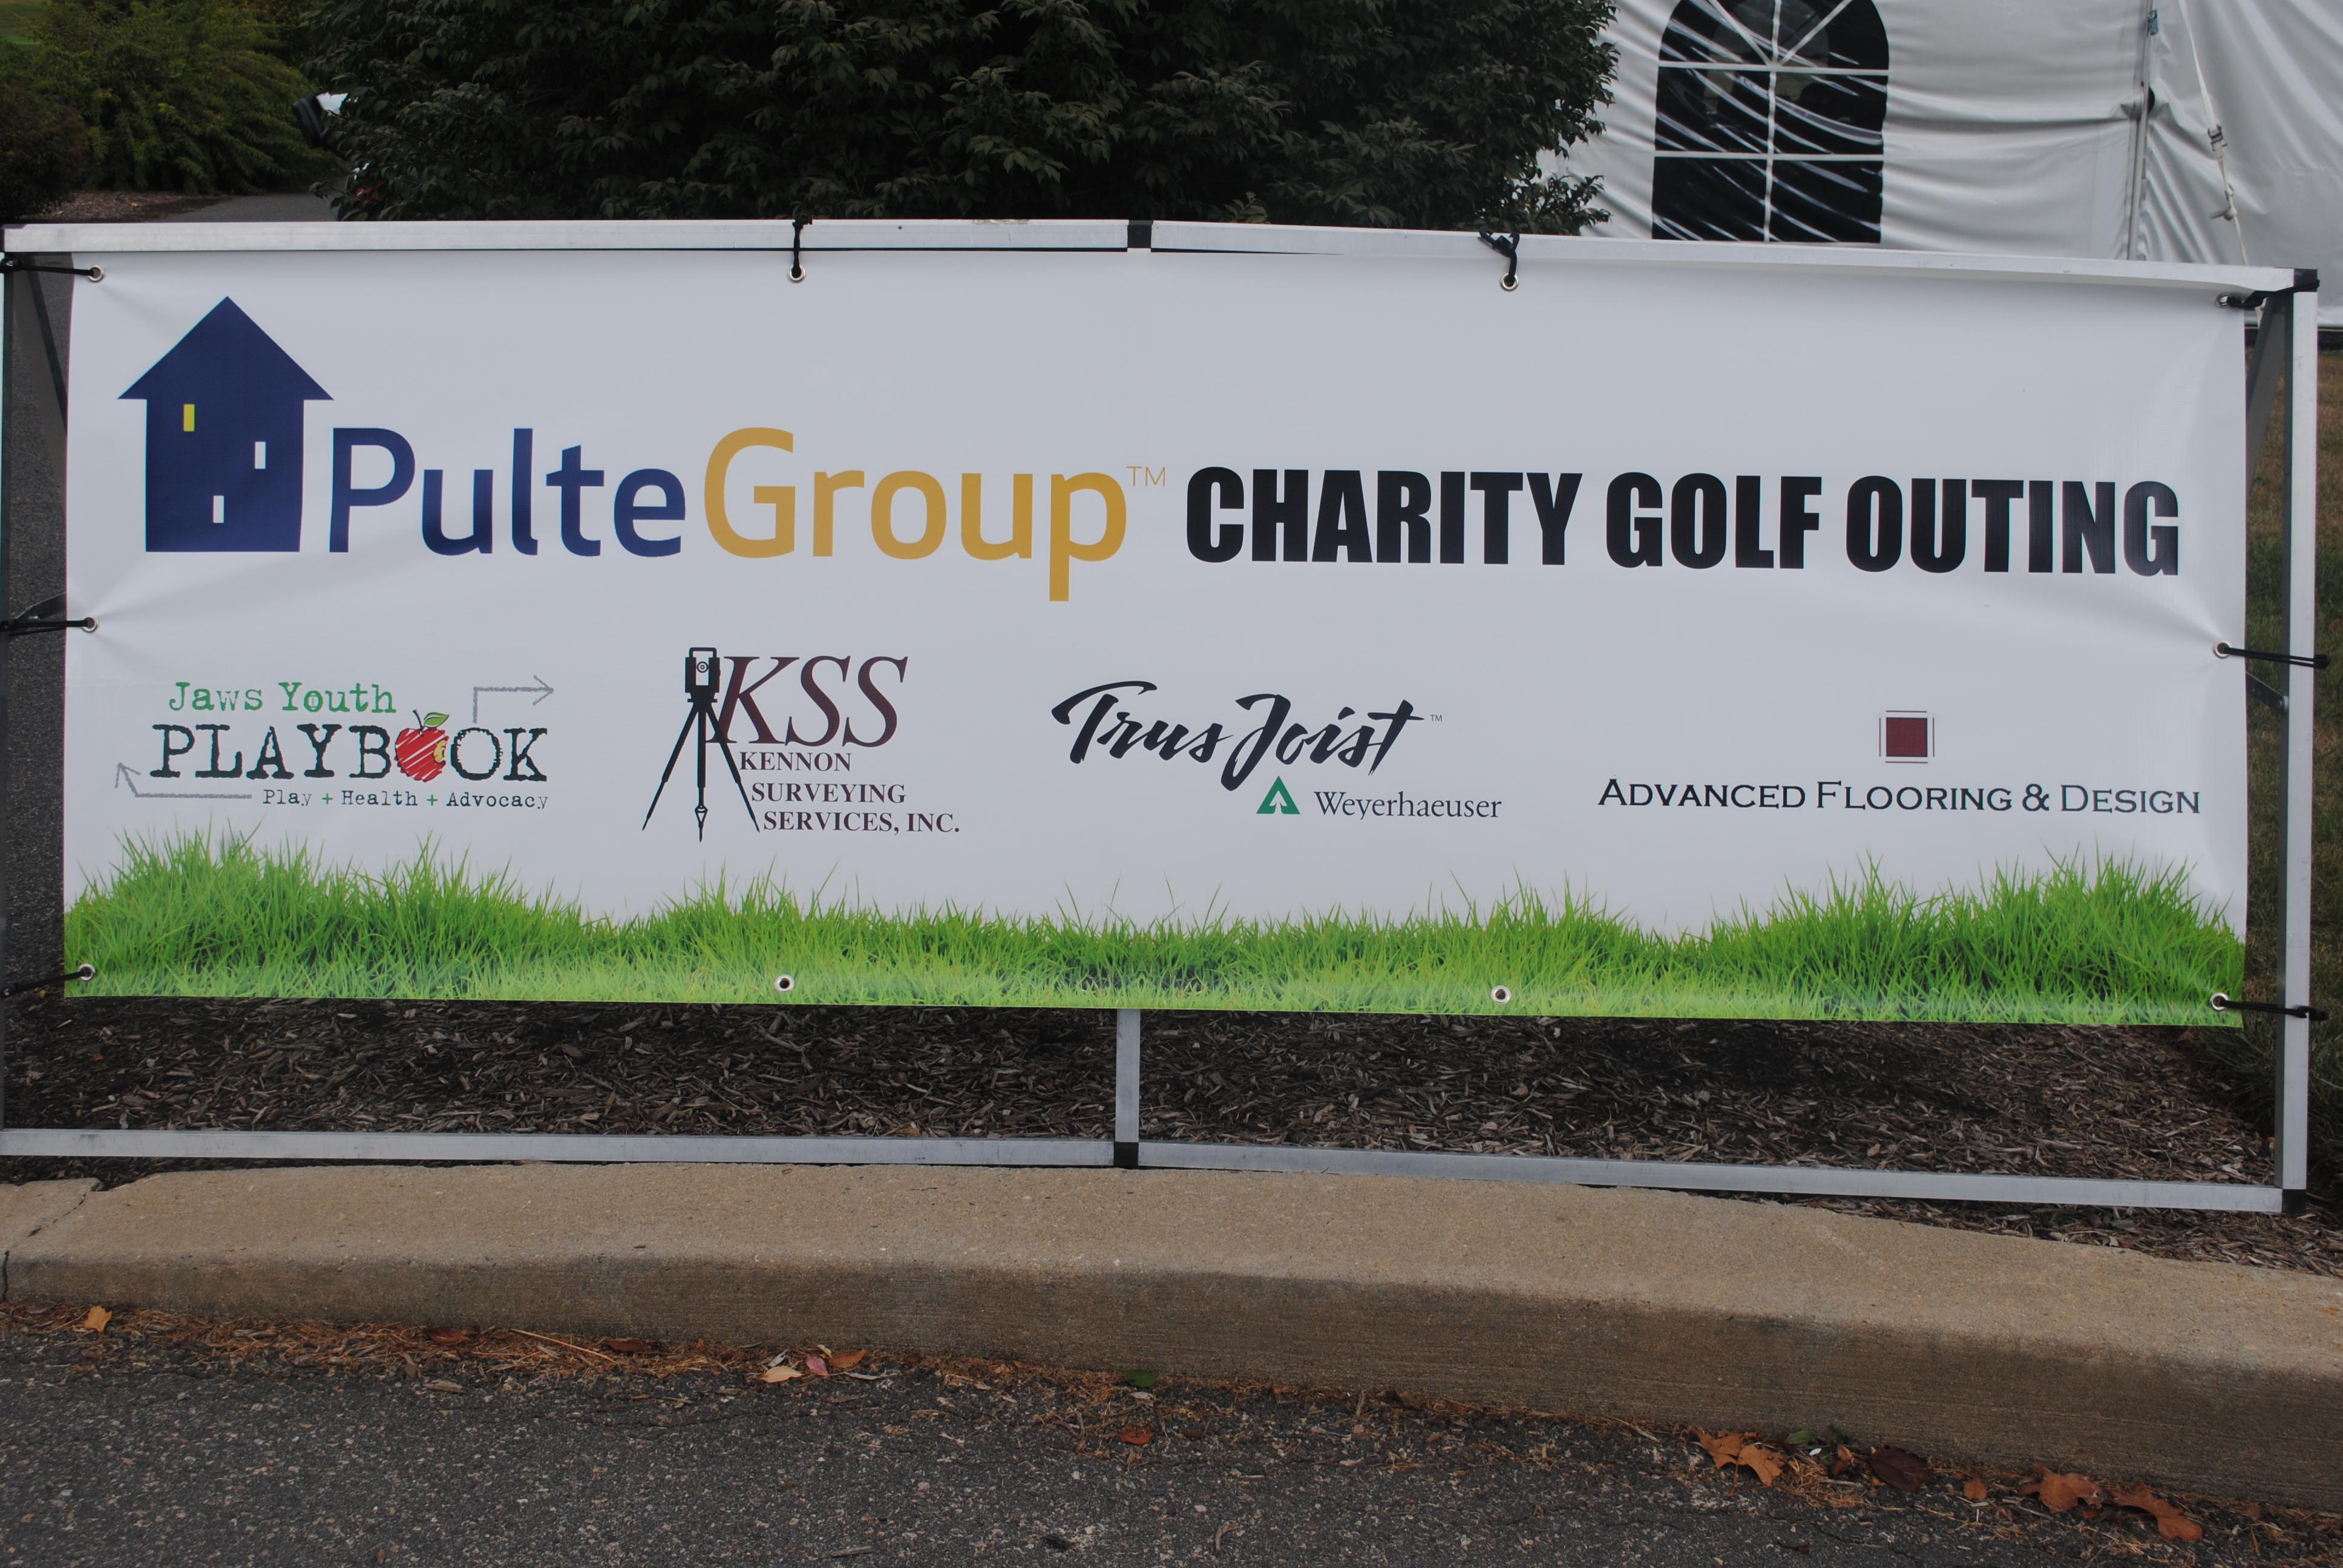 2019 Pulte Group Charity Golf Tournament / Jaws Youth Playbook